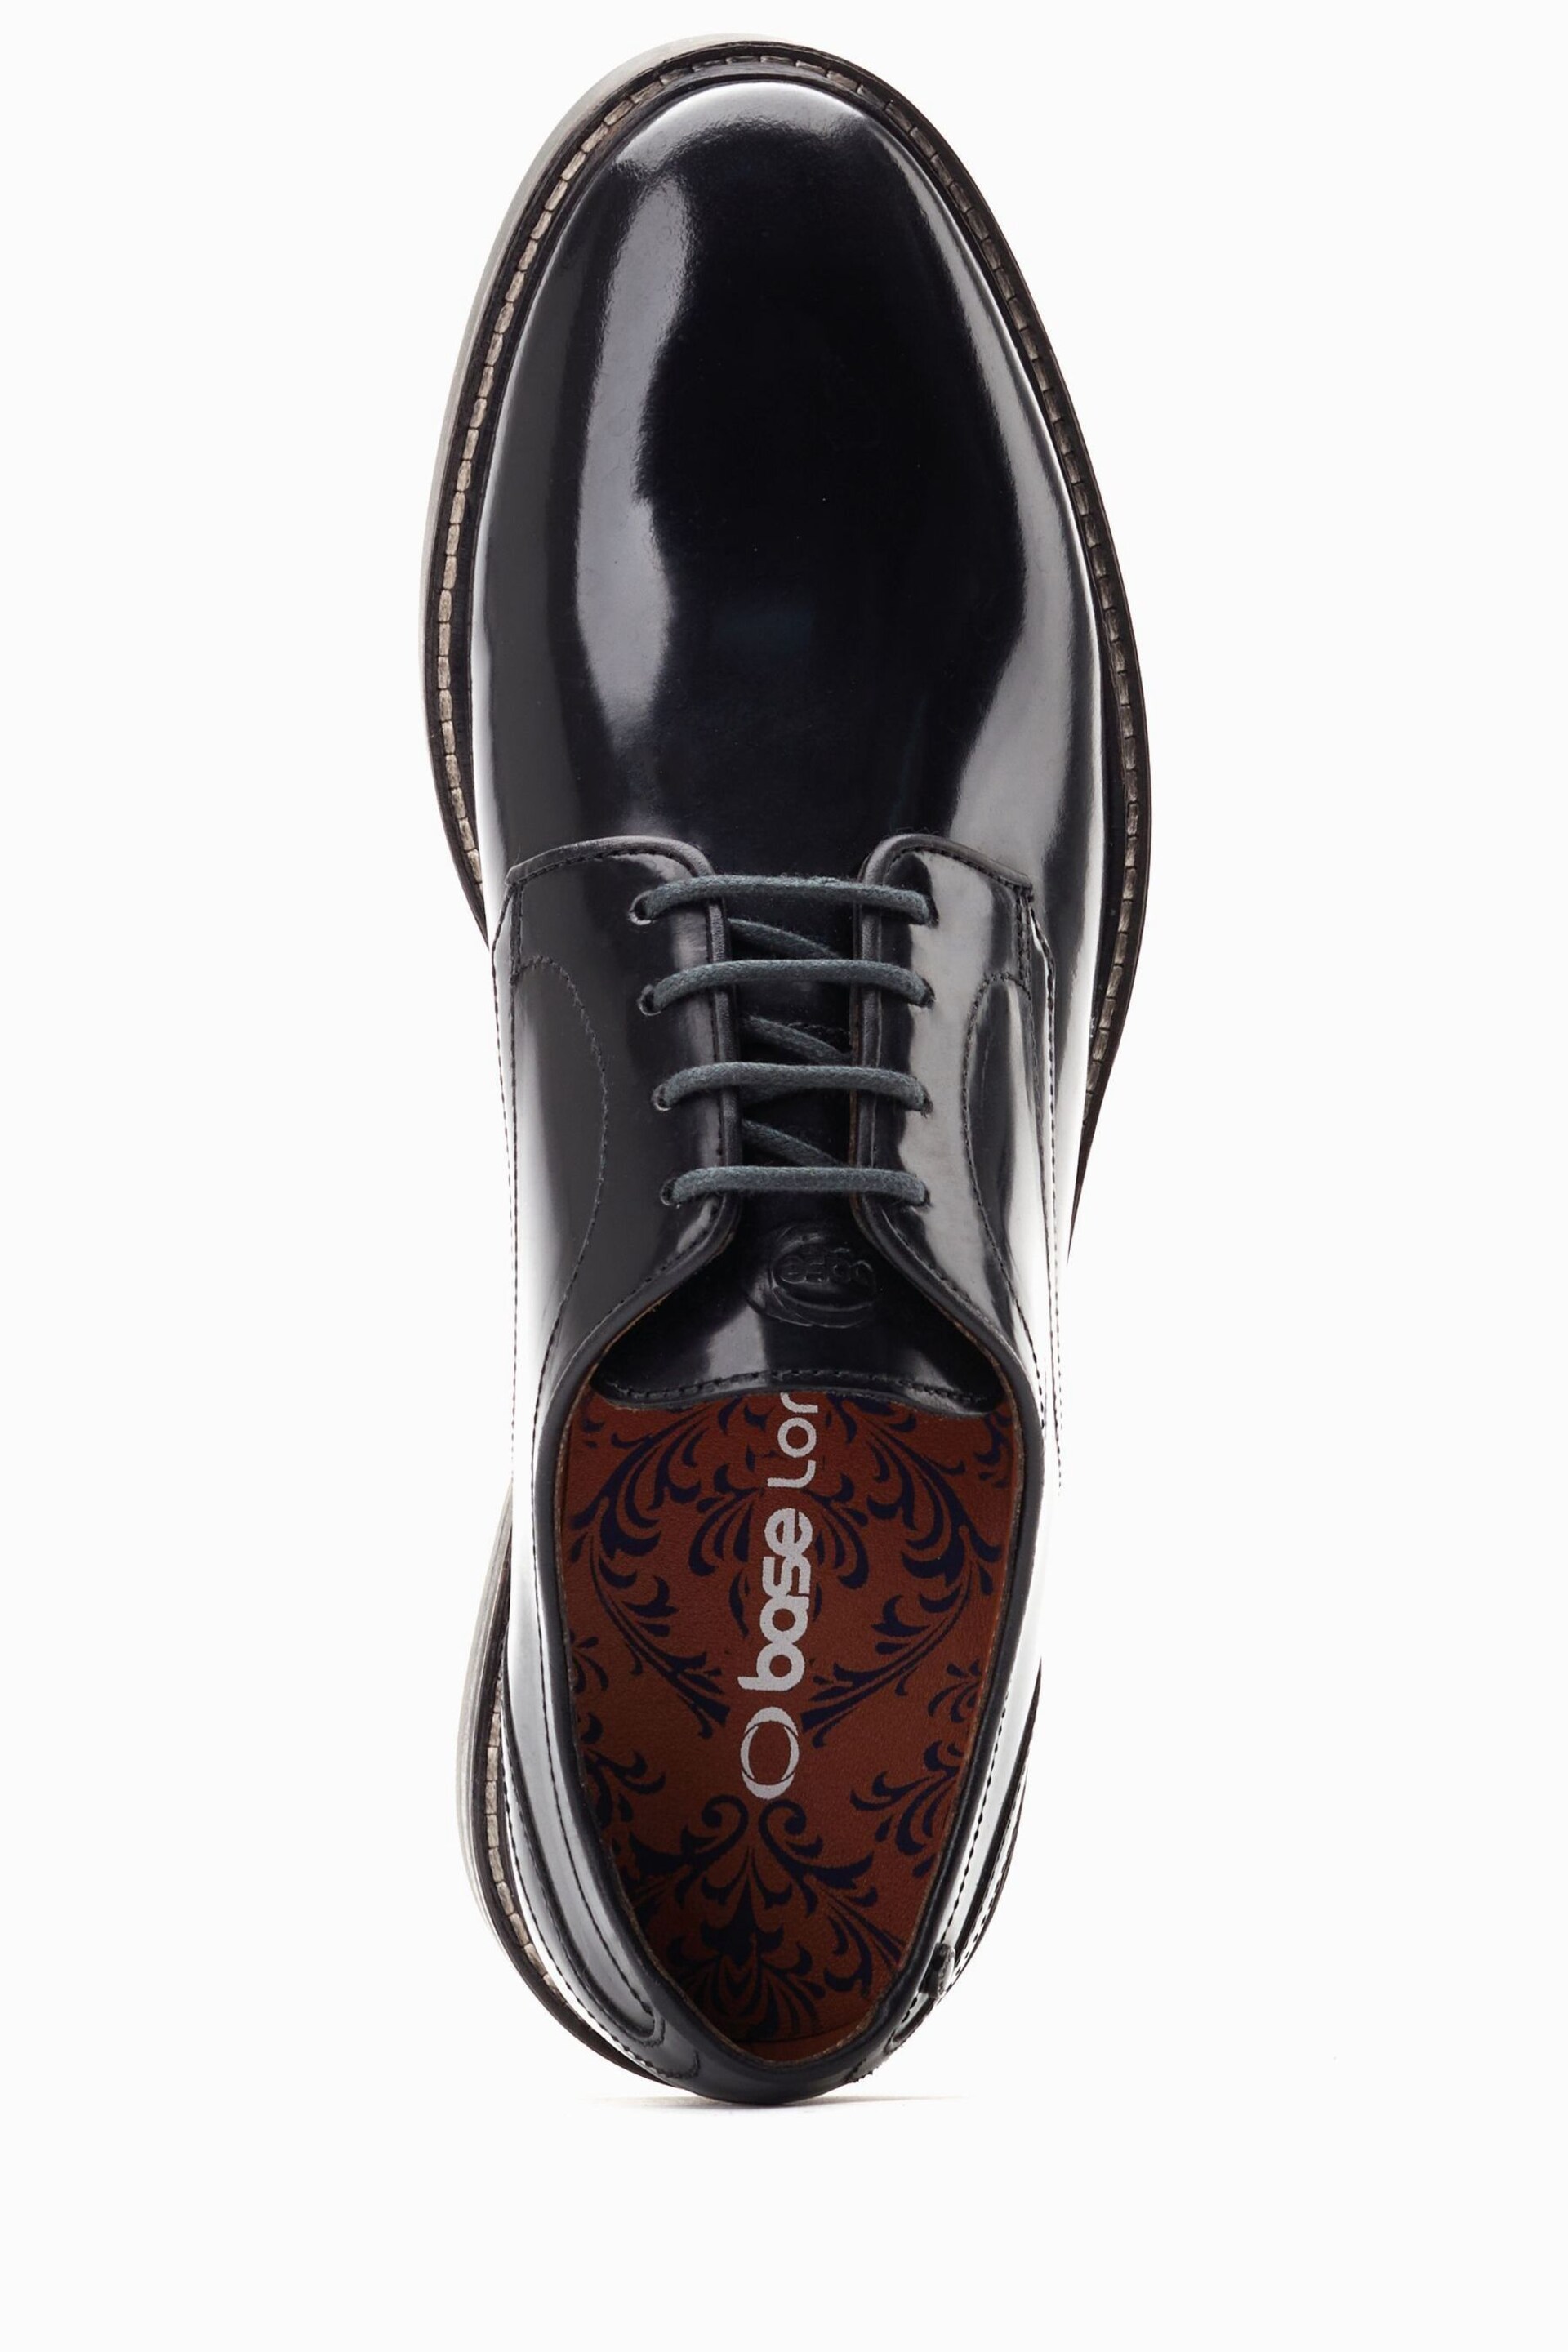 Base London Mawley Lace-Up Derby Shoes - Image 4 of 6